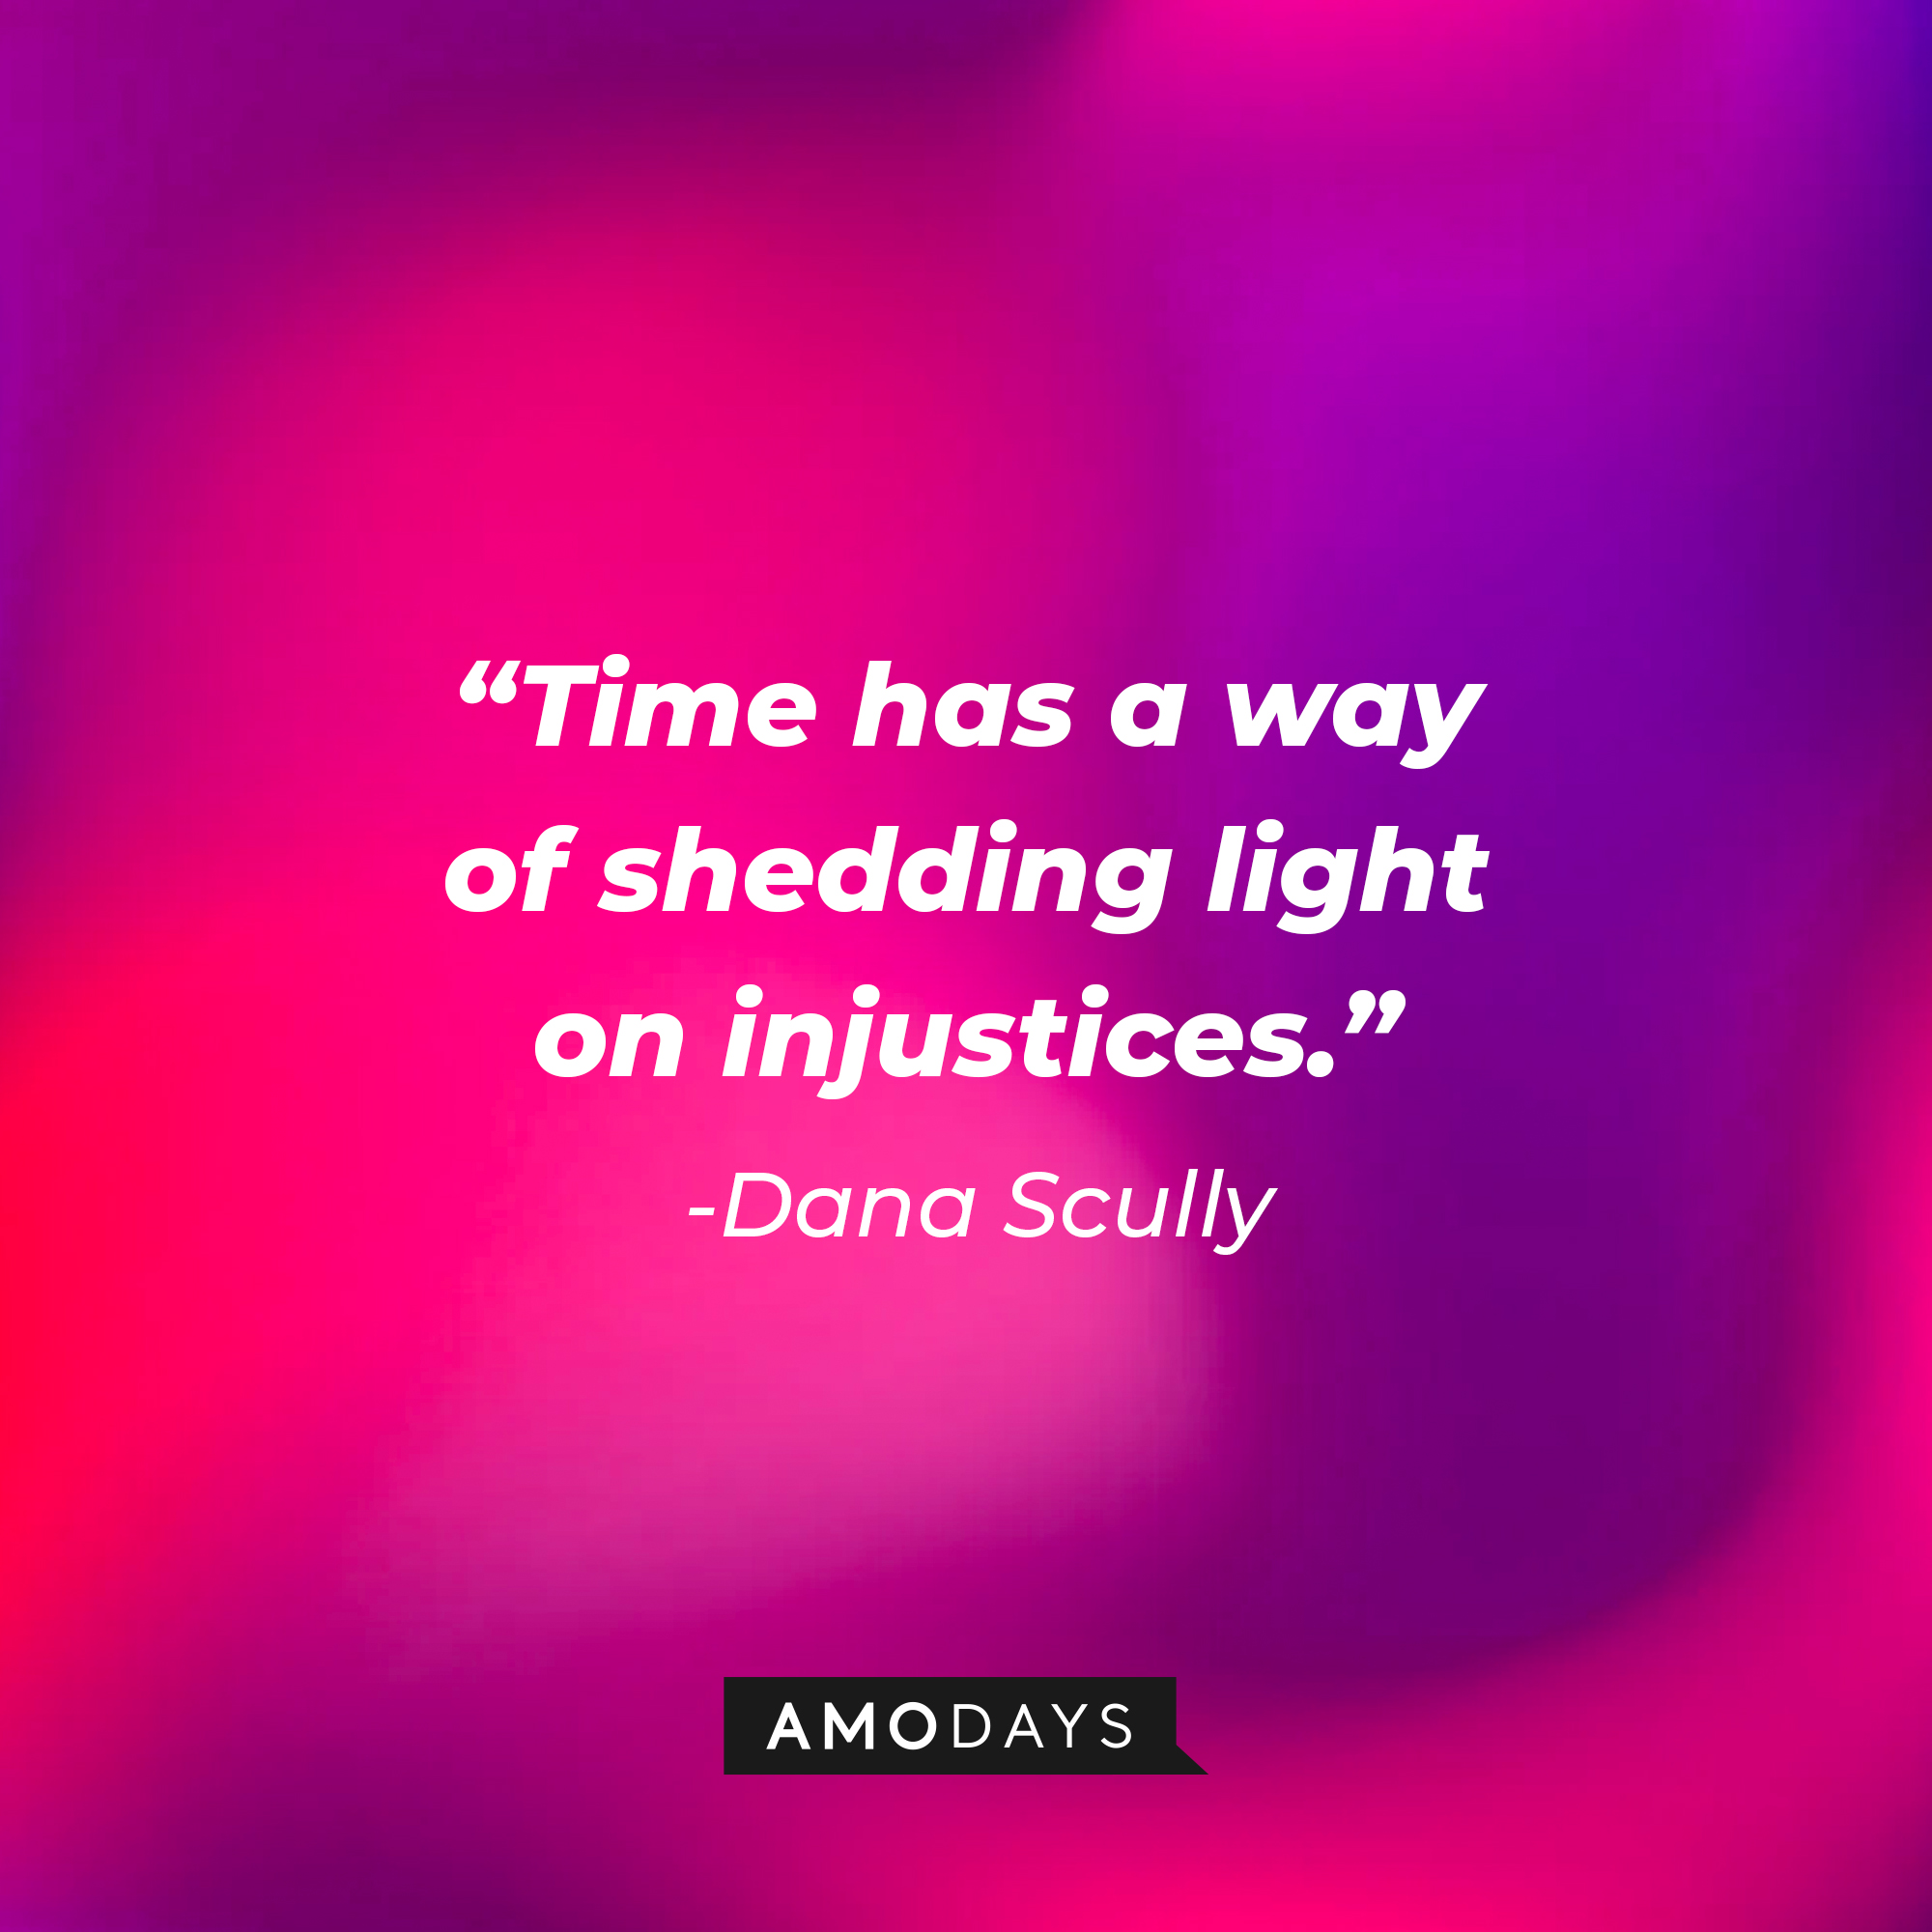 Dana Scully's quote: "Time has a way of shedding light on injustices." | Source: AmoDays